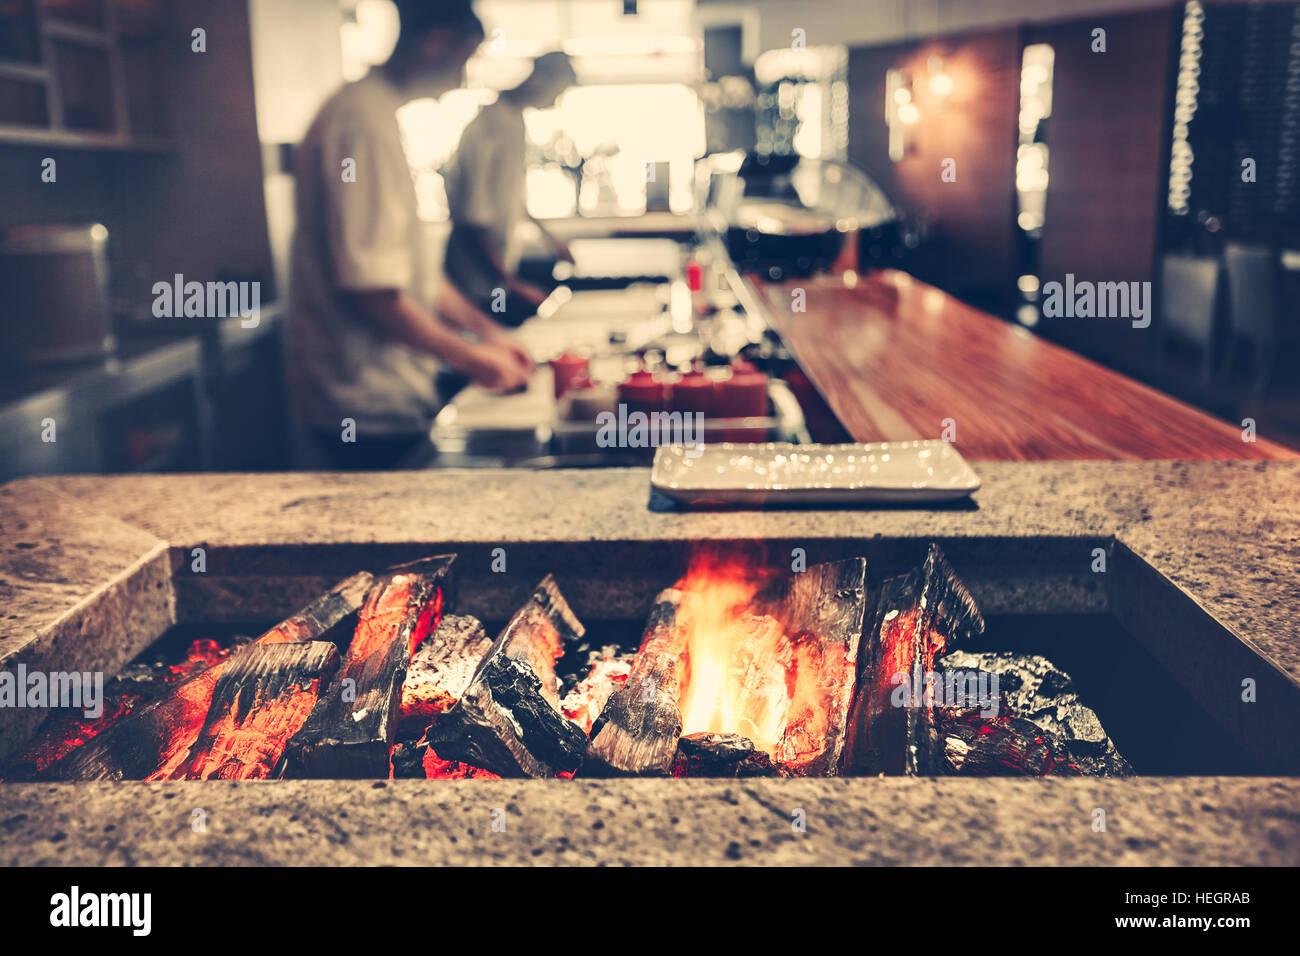 Modern restaurant with fireplace Stock Photo